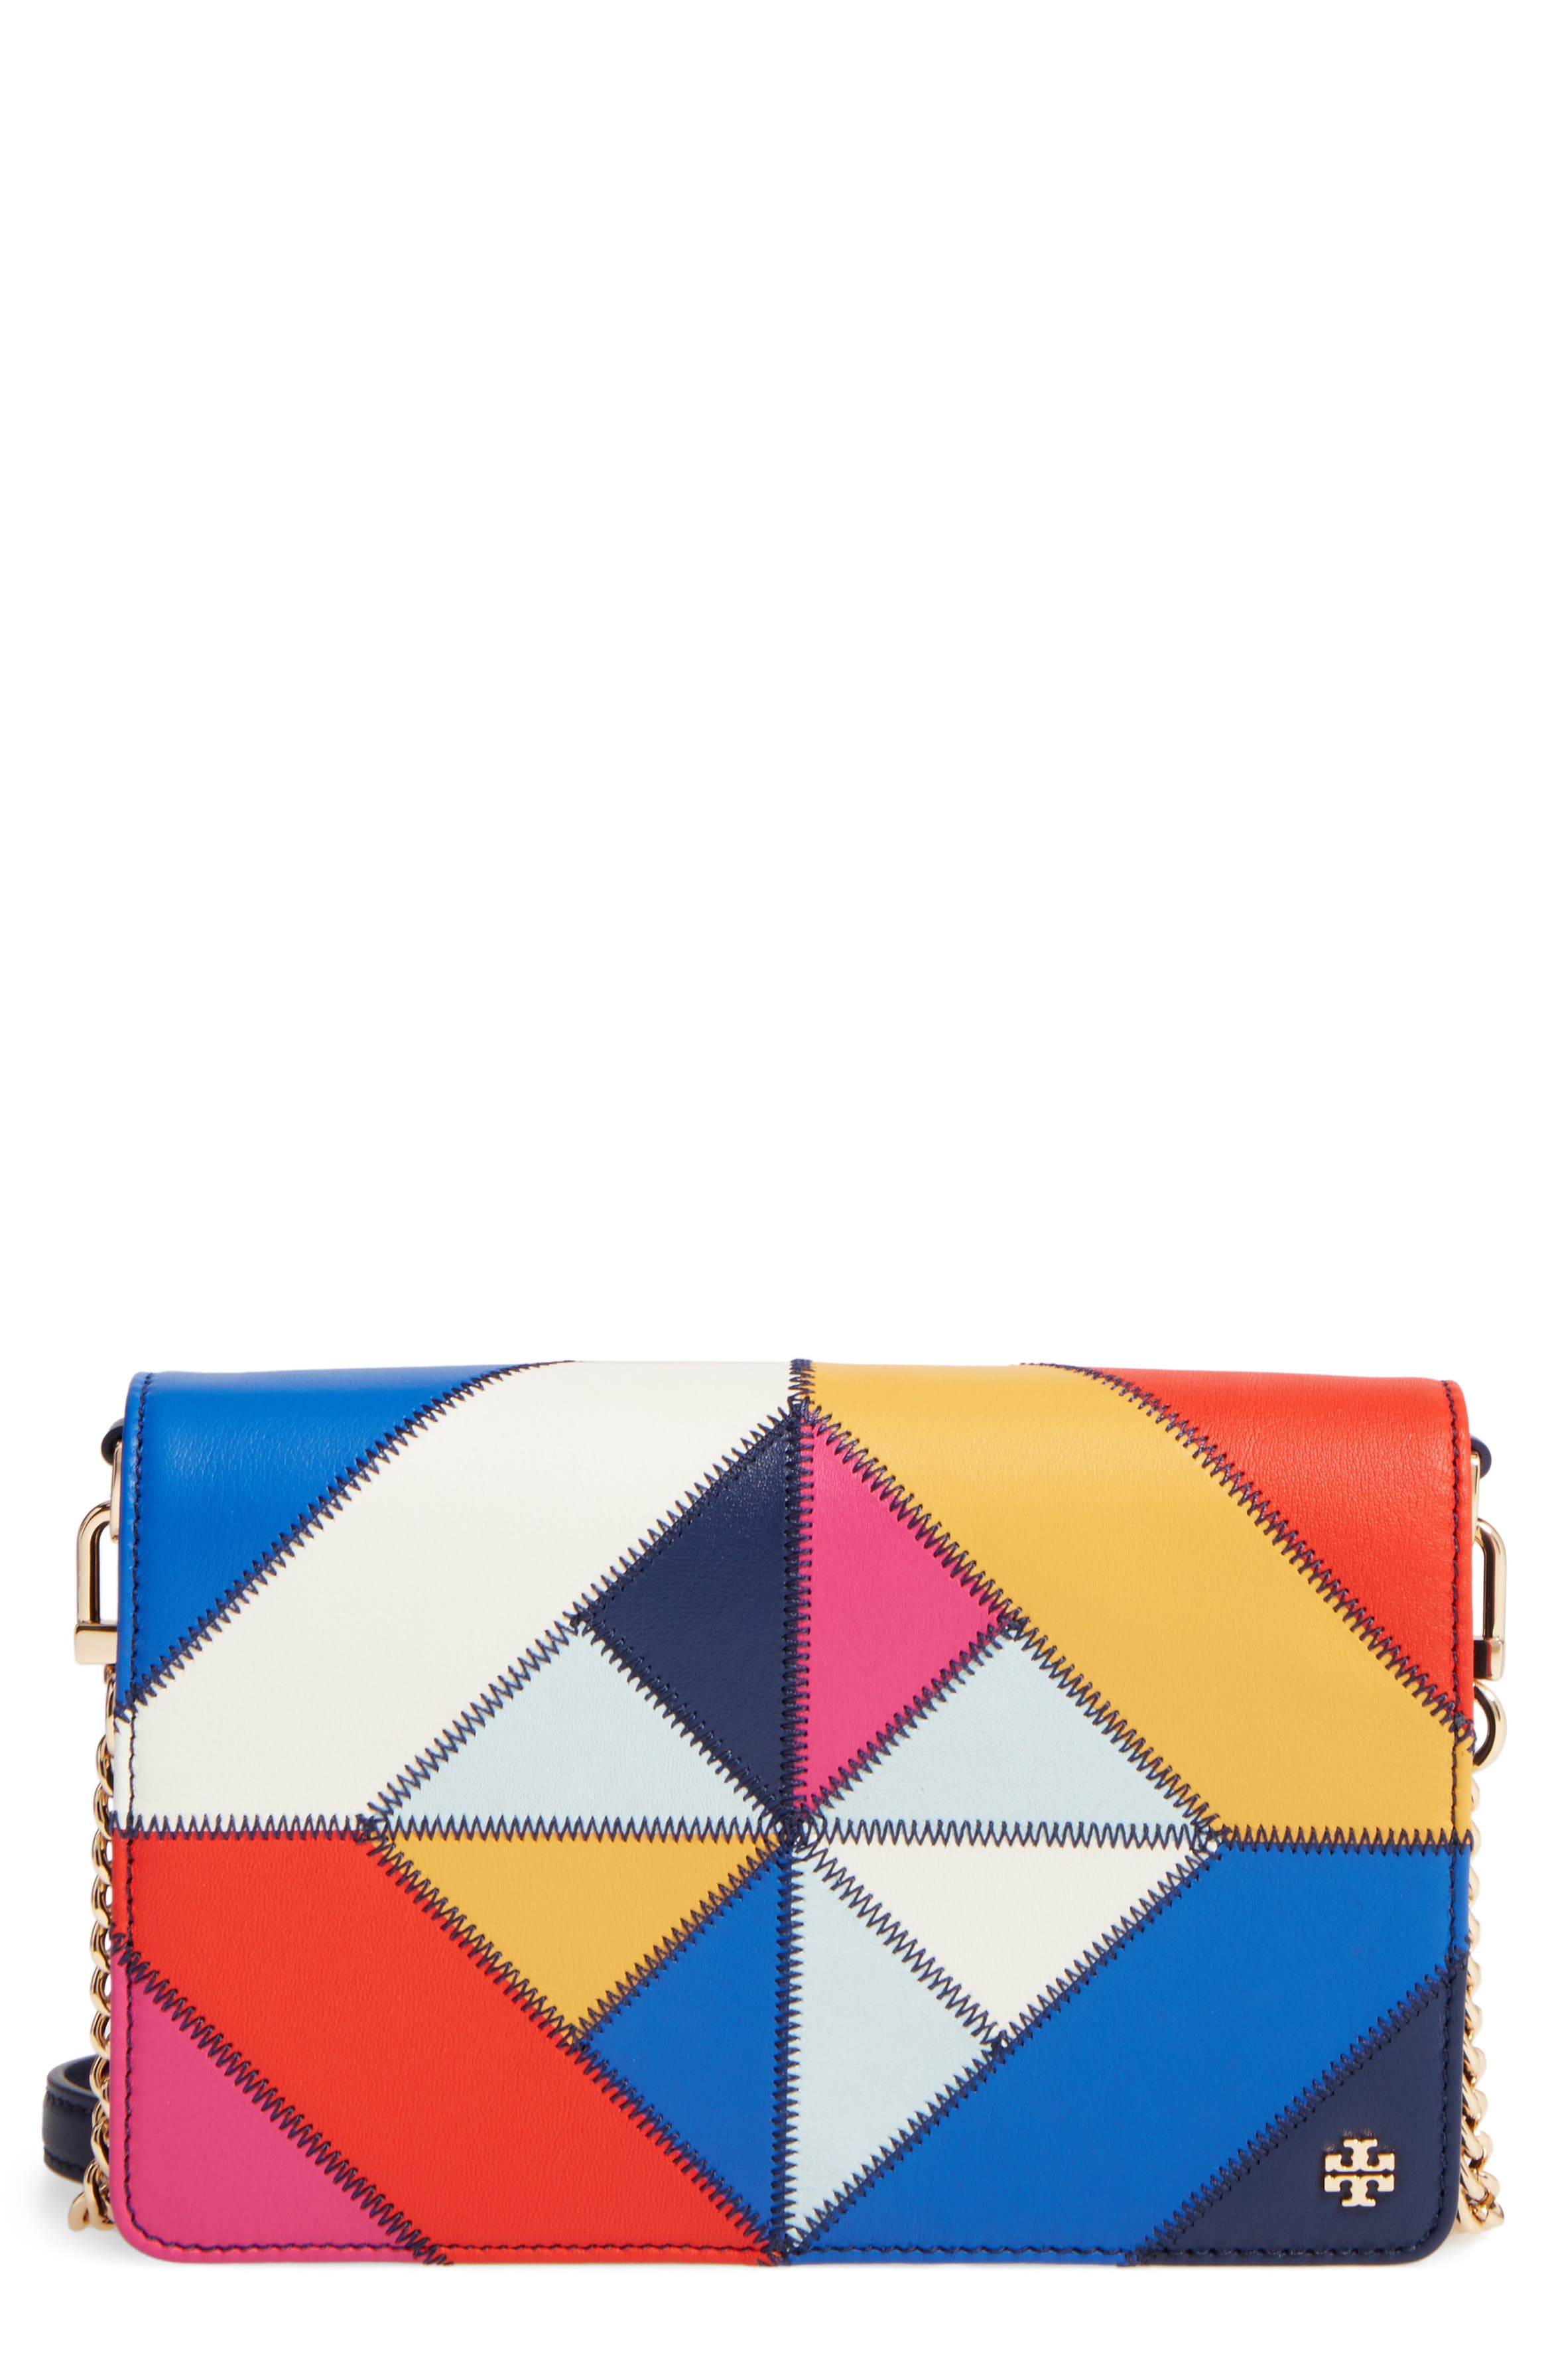 Tory Burch Diamond Stitch Leather Wallet on a Chain | Nordstrom